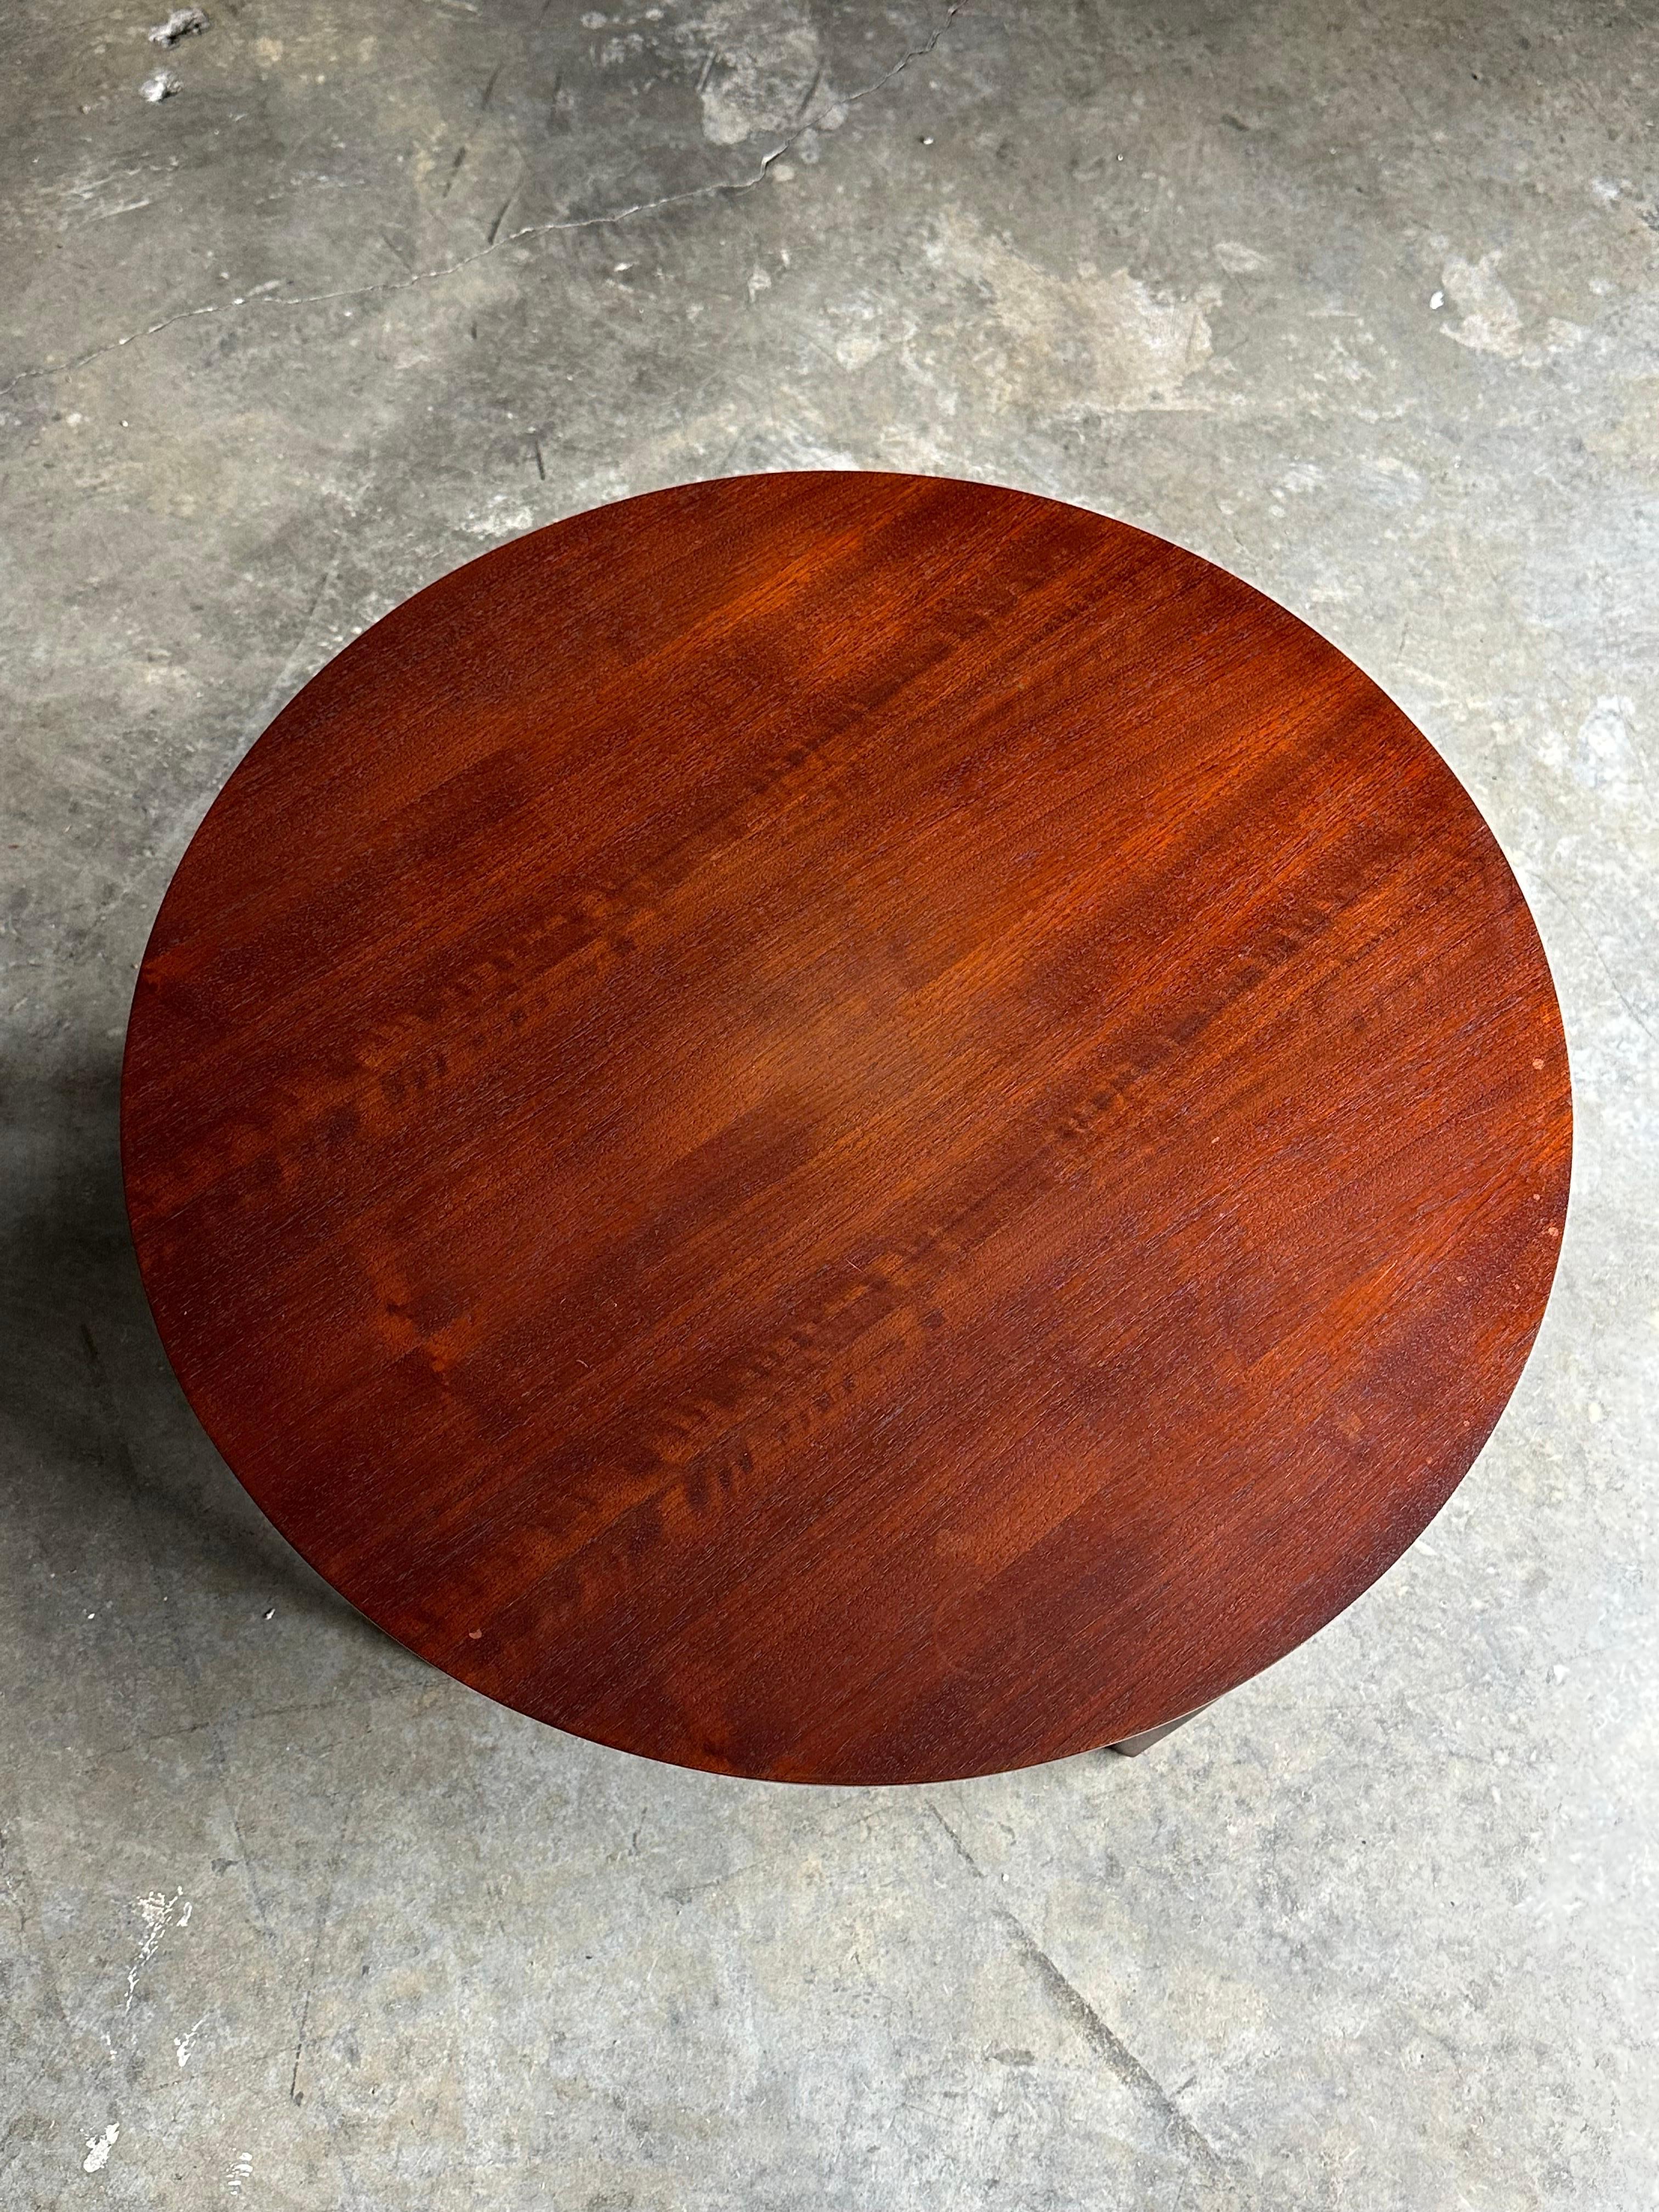 An elegant lamp or occasional table designed by Gio Ponti and produced by Singer and Sons. Table features quarter sawn walnut grain and classic Ponti stylized legs. Please note there is some light fading towards the center of the tier and top, but